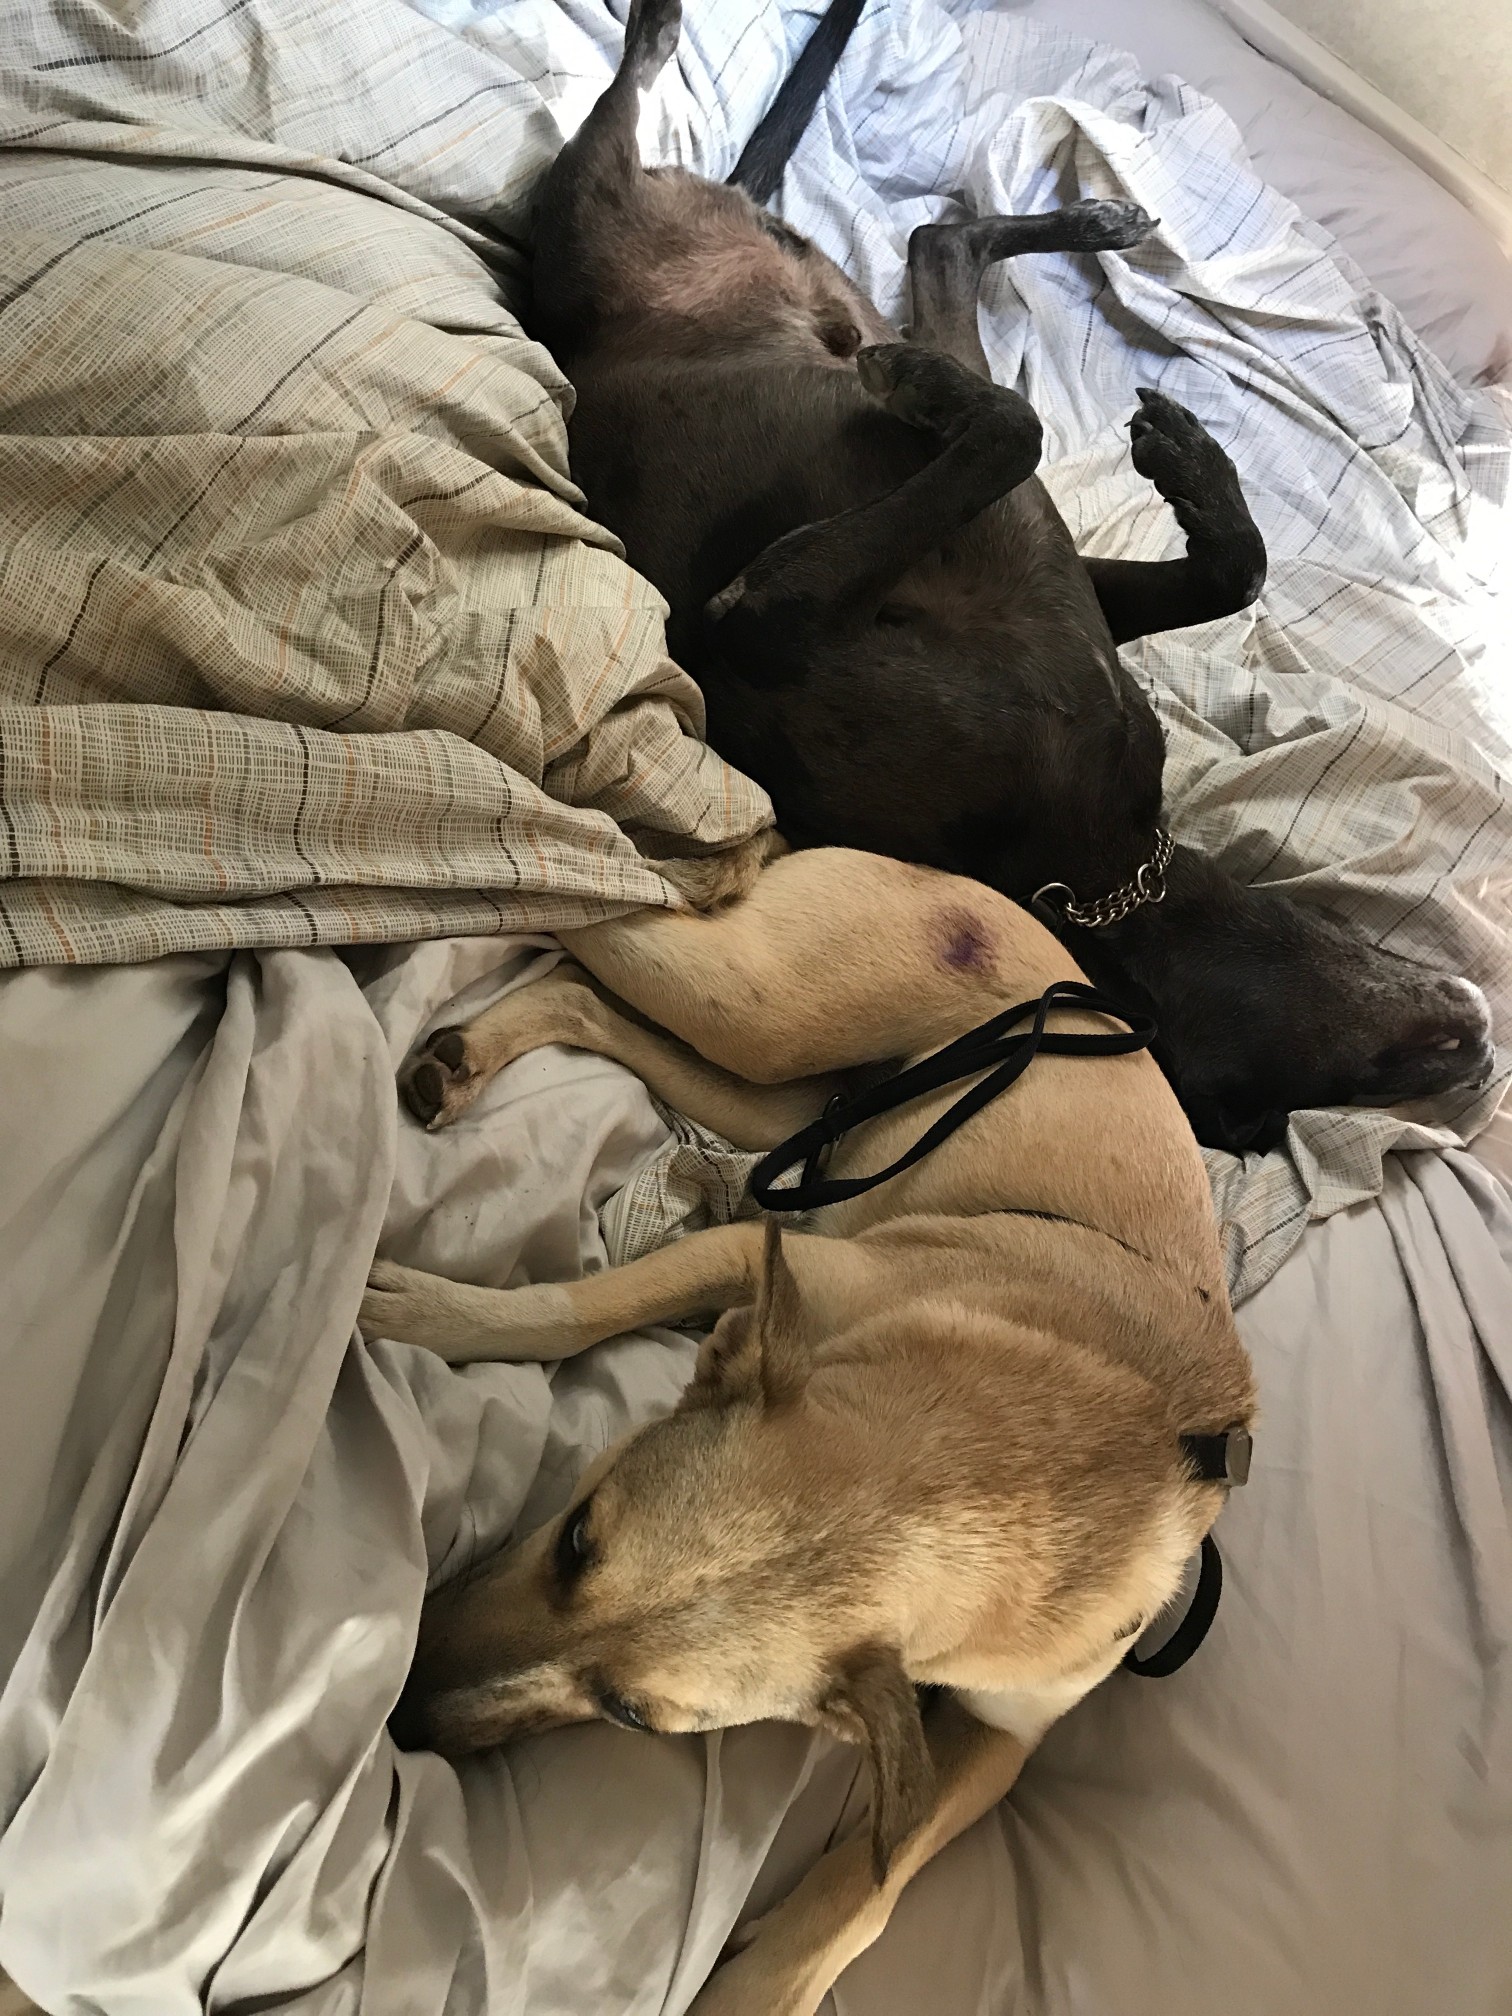 dogs on bed